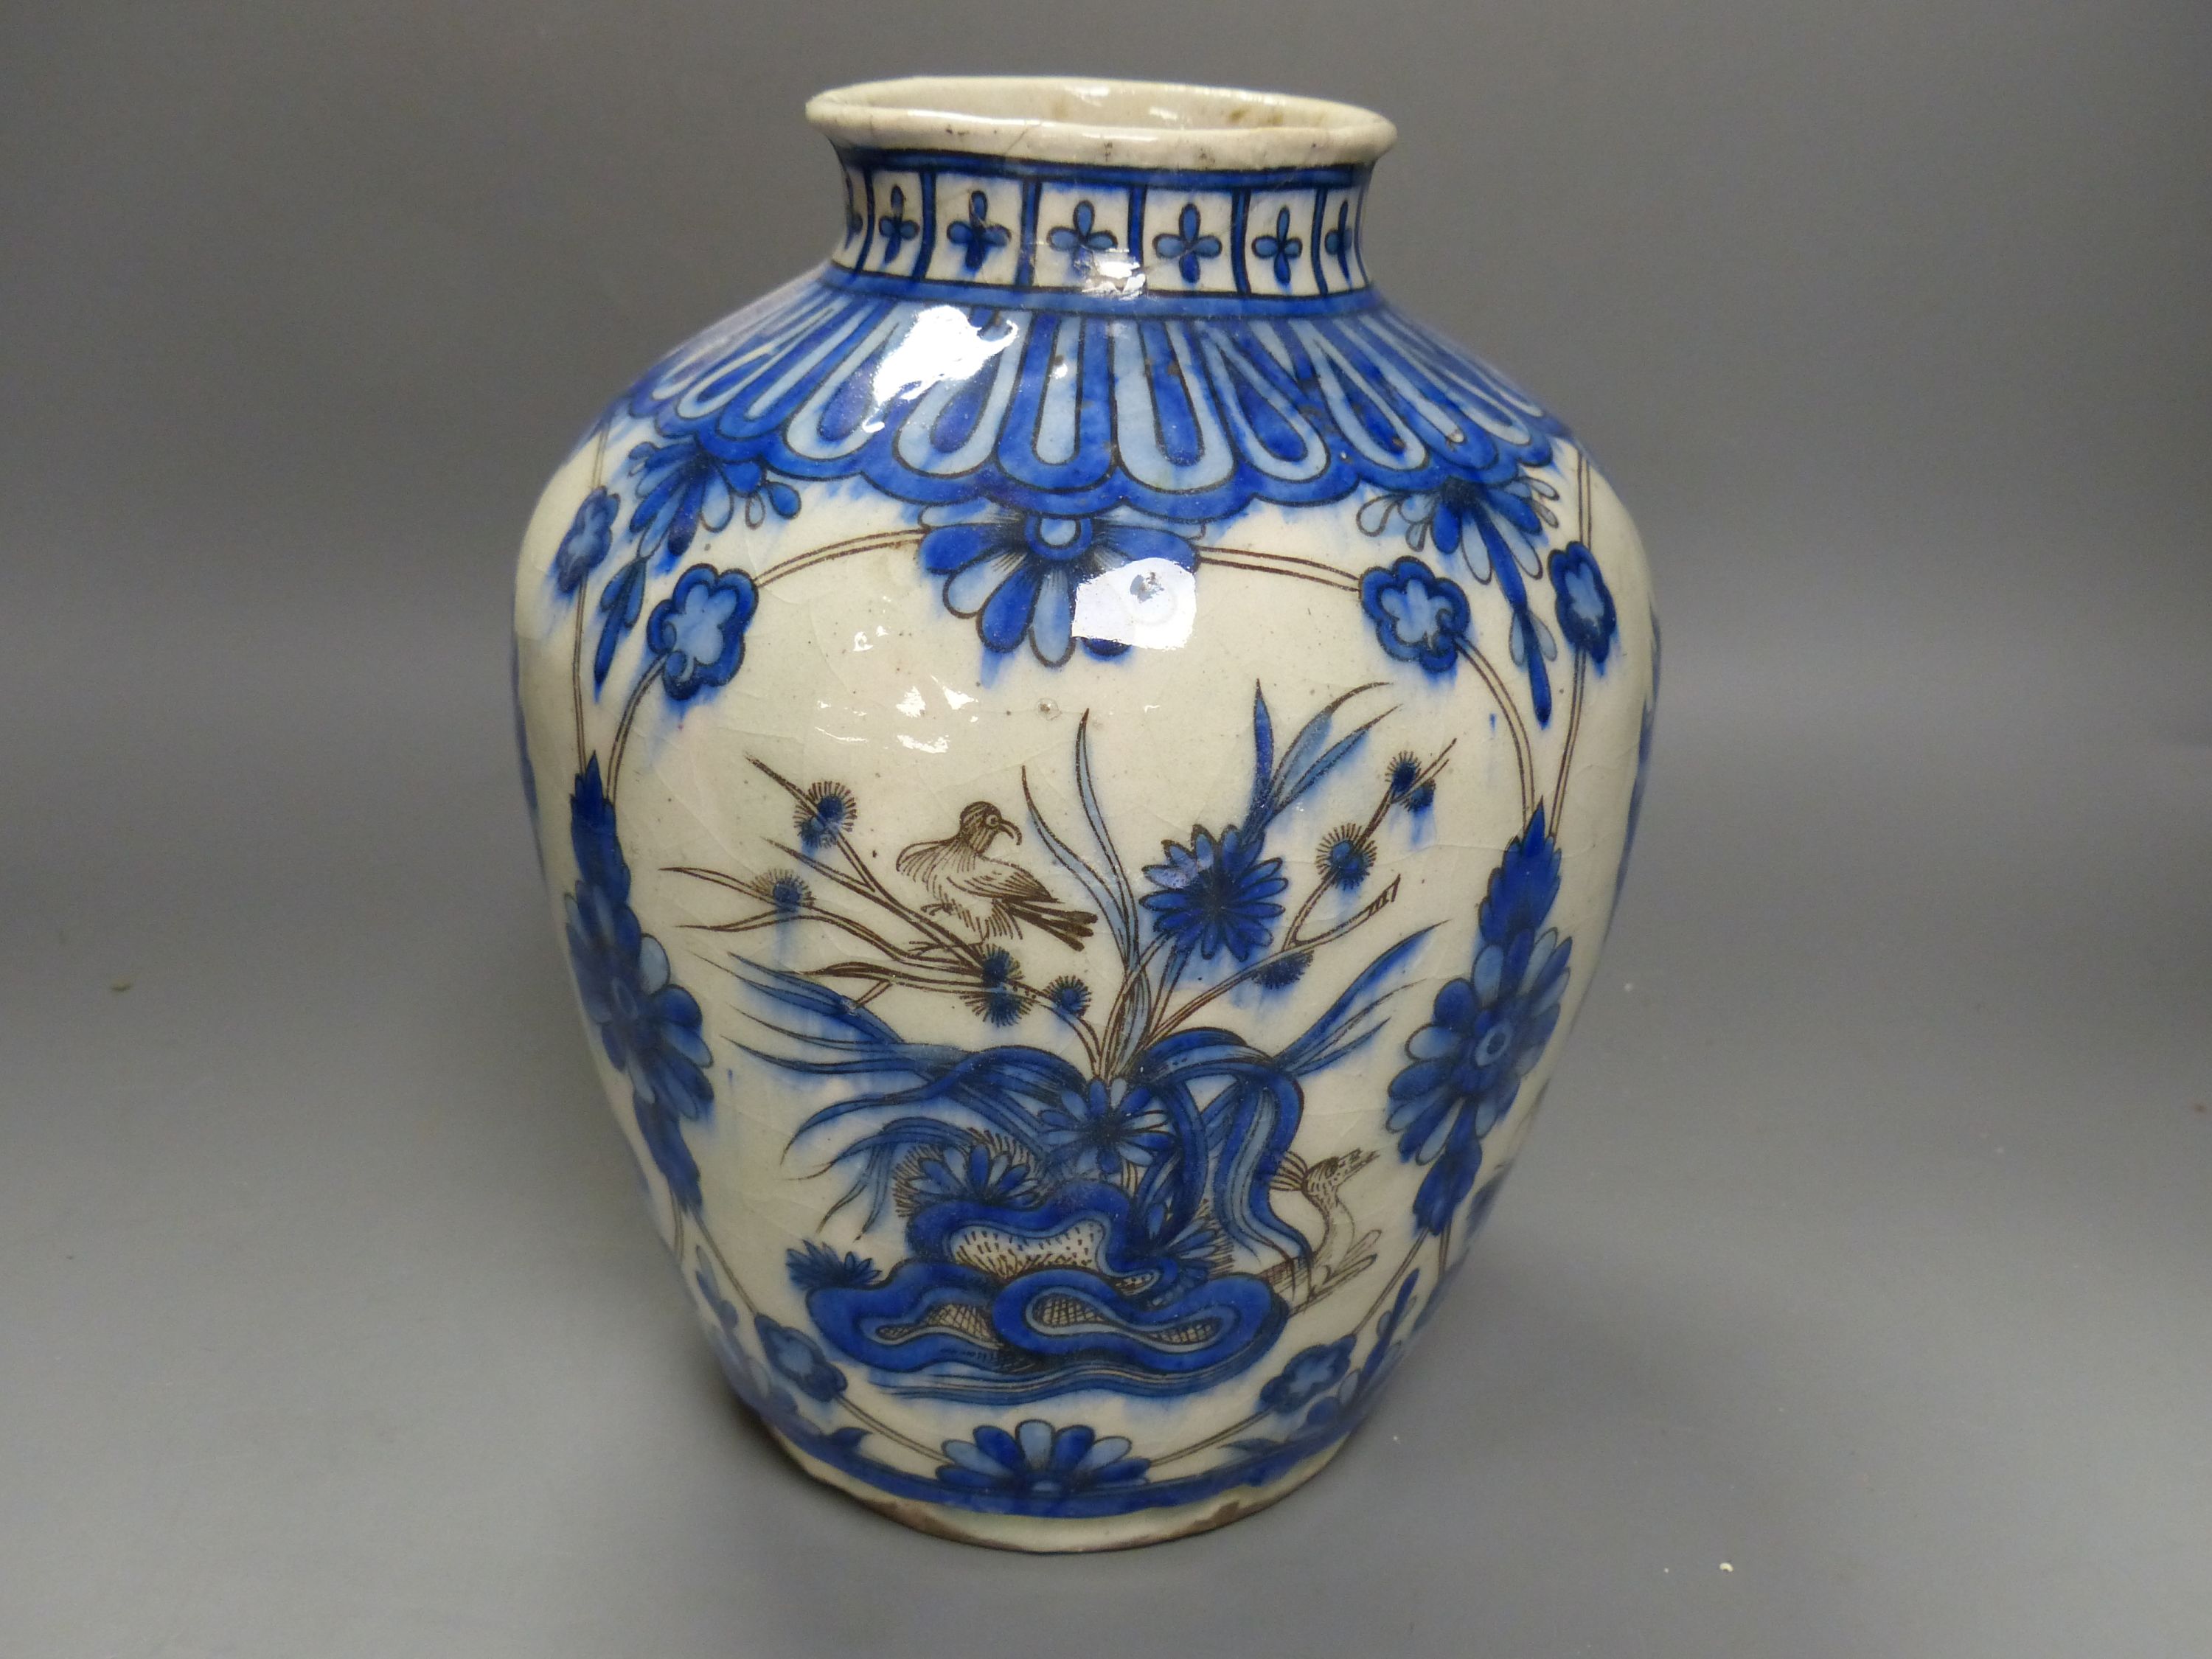 A 19th century Persian Safavid style pottery vase, height 25cm